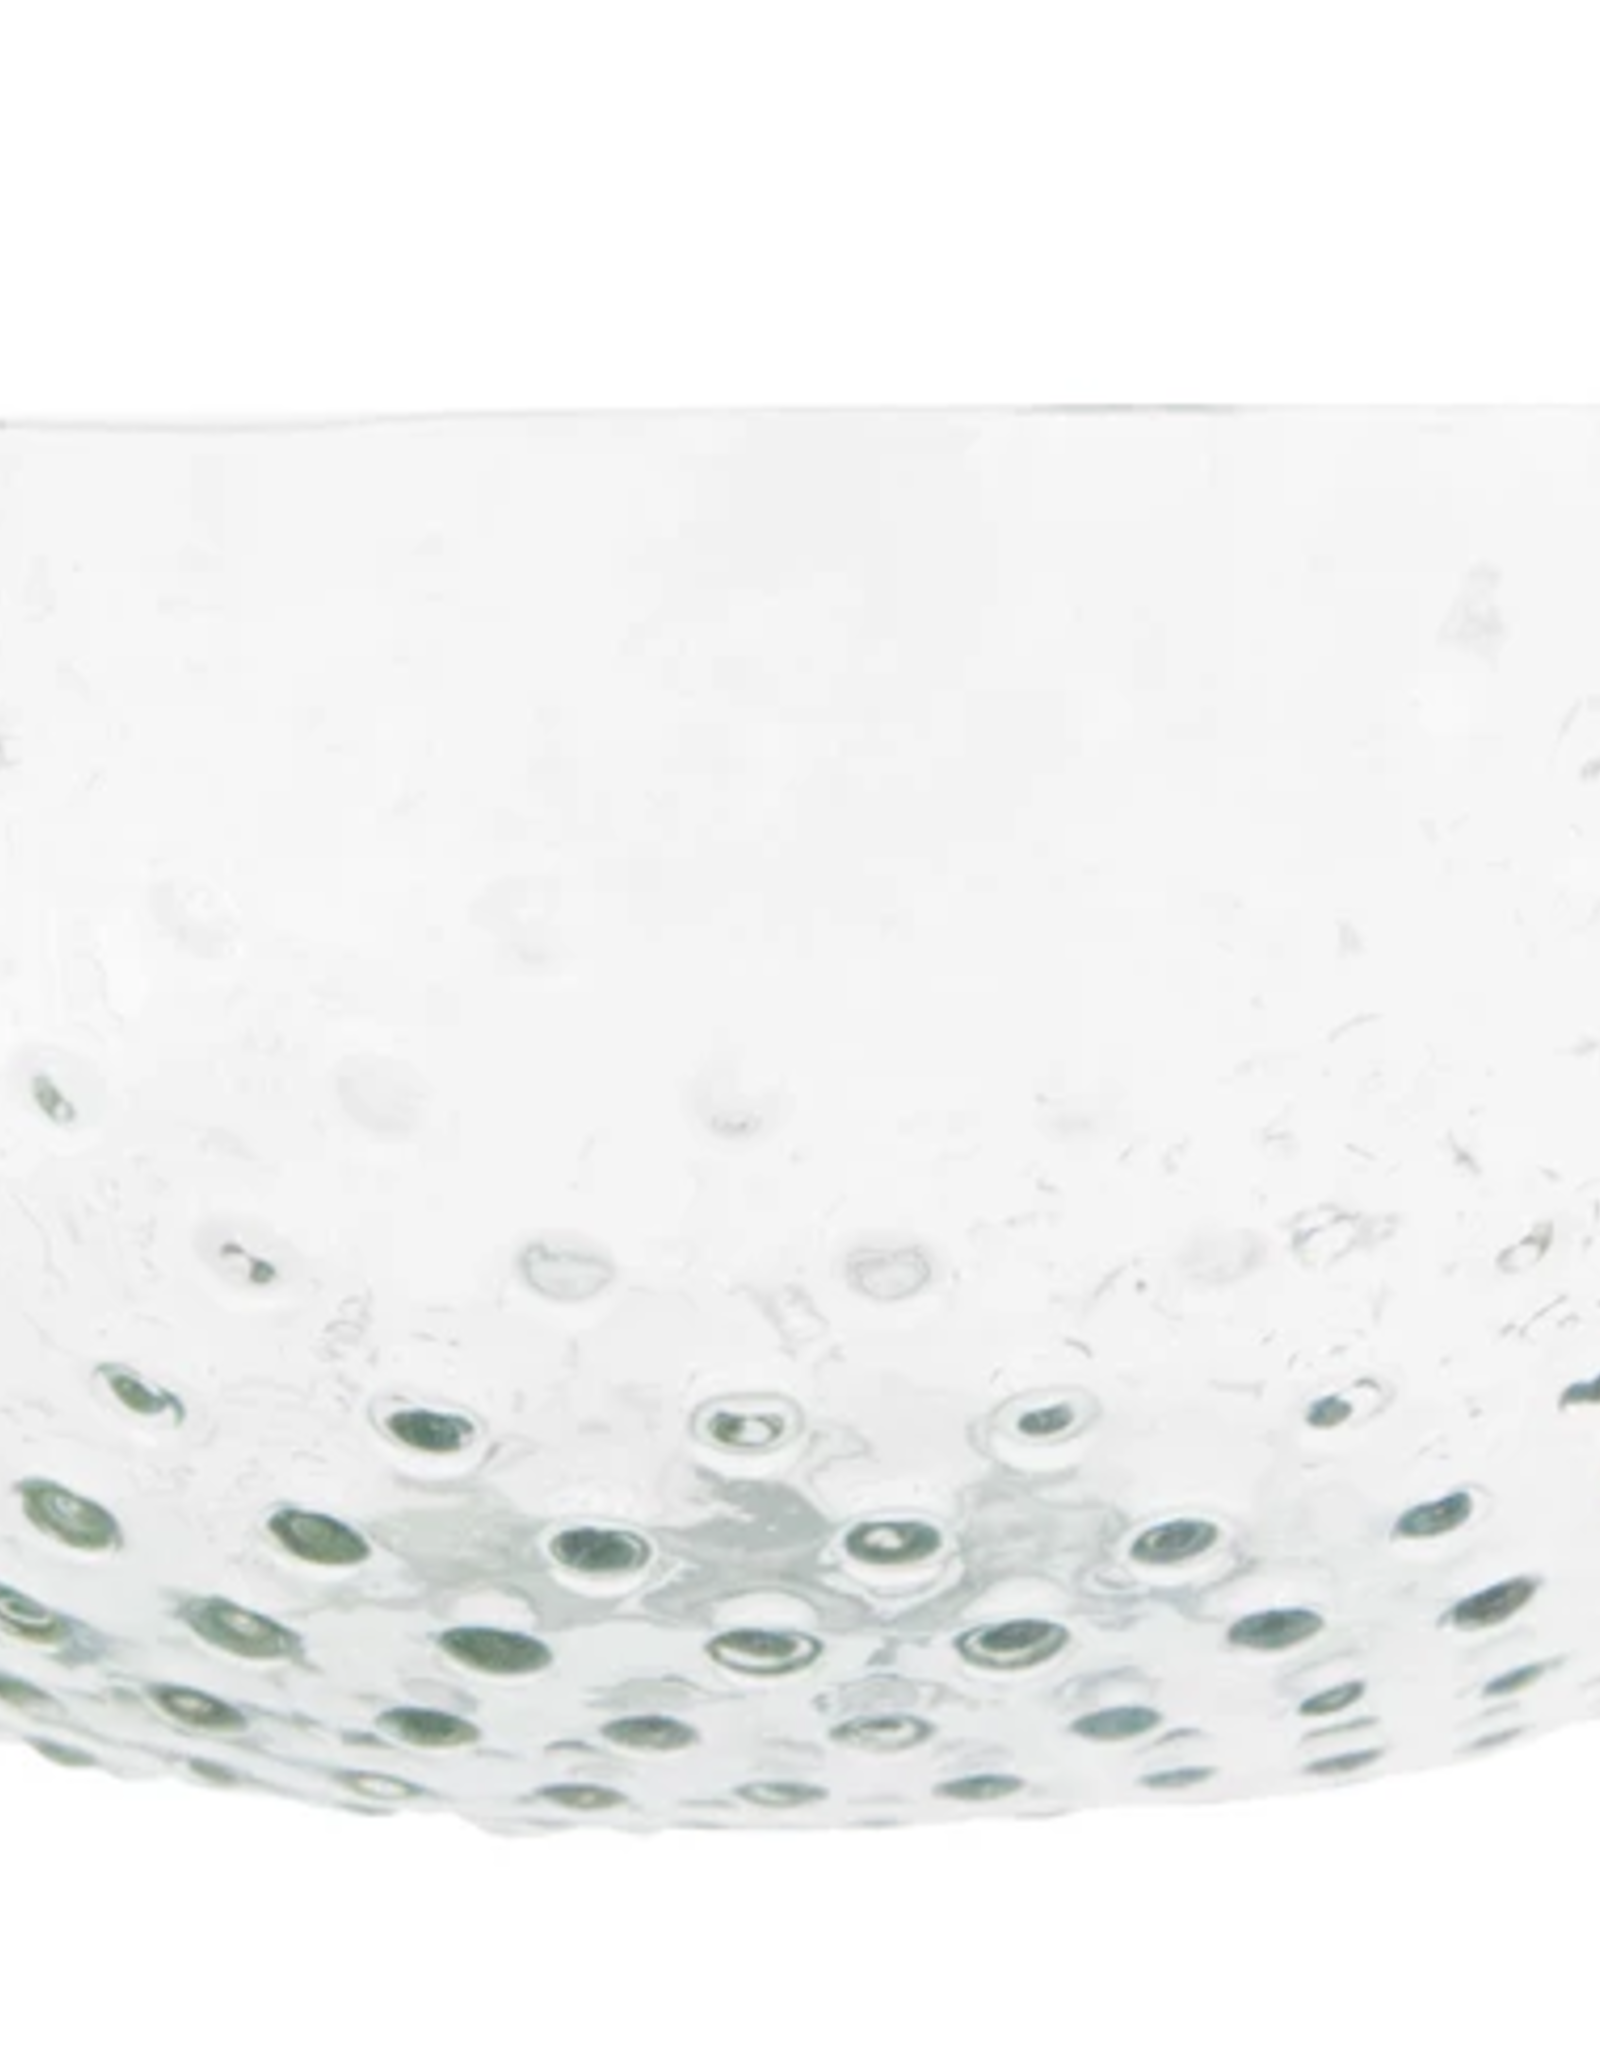 Recycled Glass Hobnail Low Bowl  8-1/4" Round x 2"H